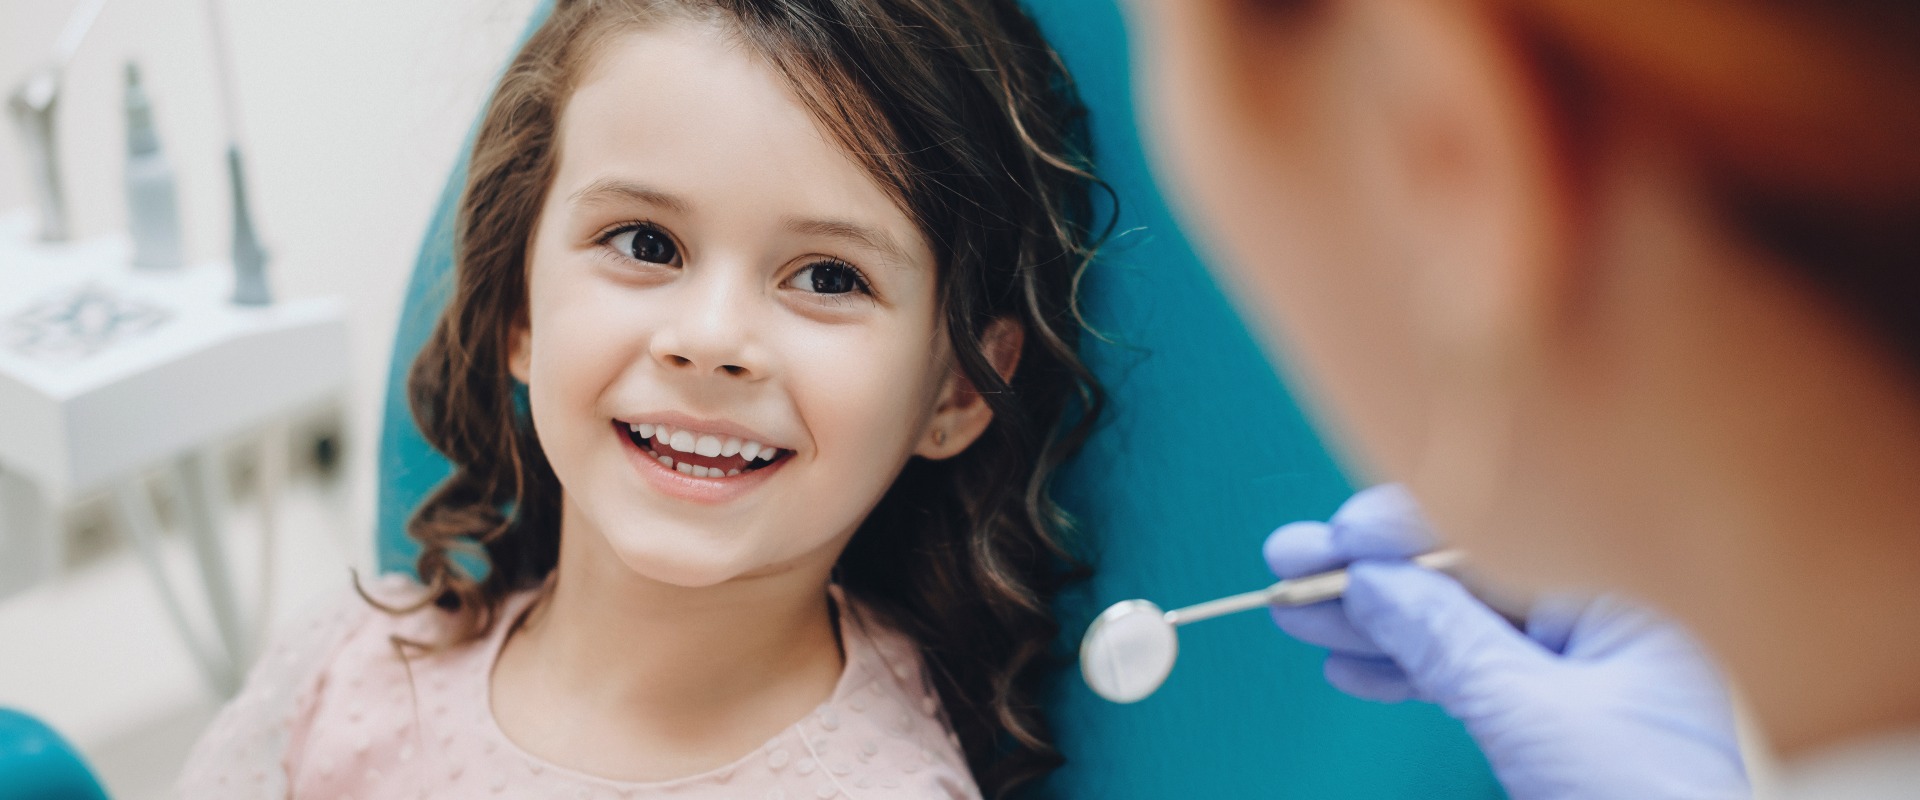 Curly haired little girl looking and smiling to the dentist after a checking up jpg